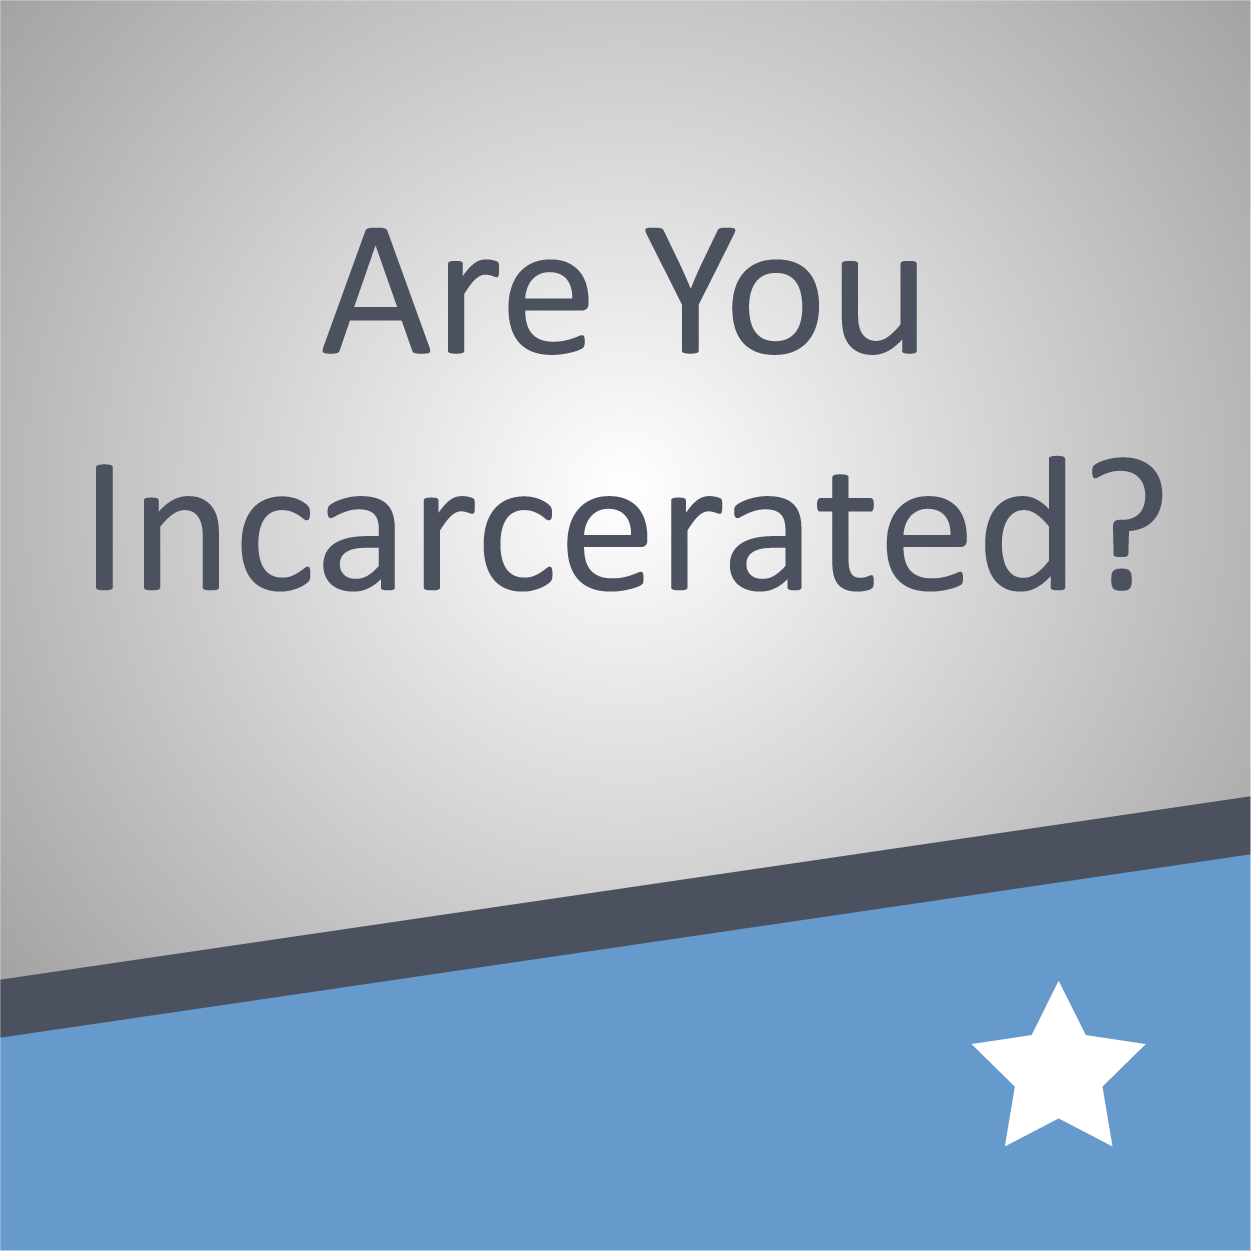 are you incarcerated?